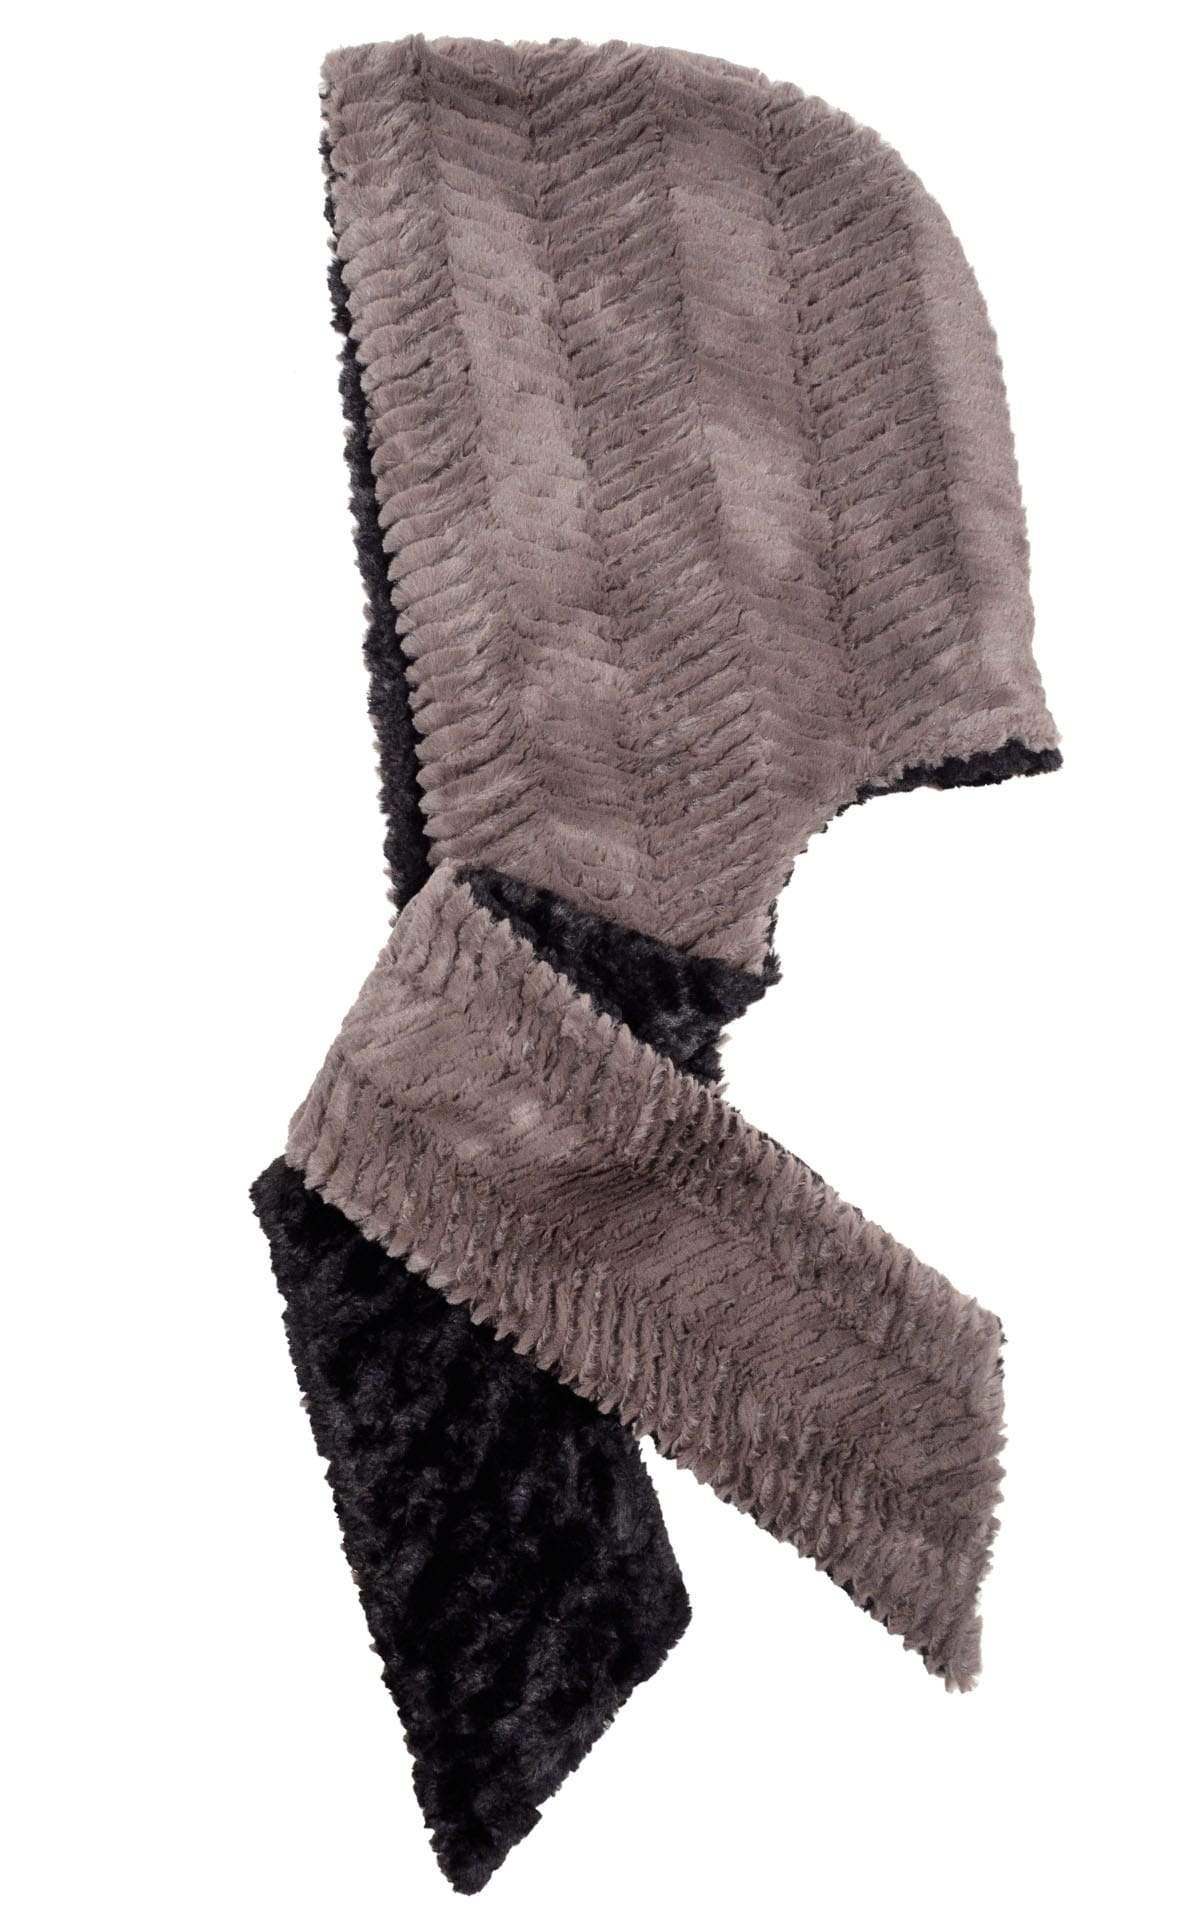 Pandemonium Millinery Tri-Color Scarf with Pockets - Pearl Fox / Cuddly Gray / Savannah Cat in Gray